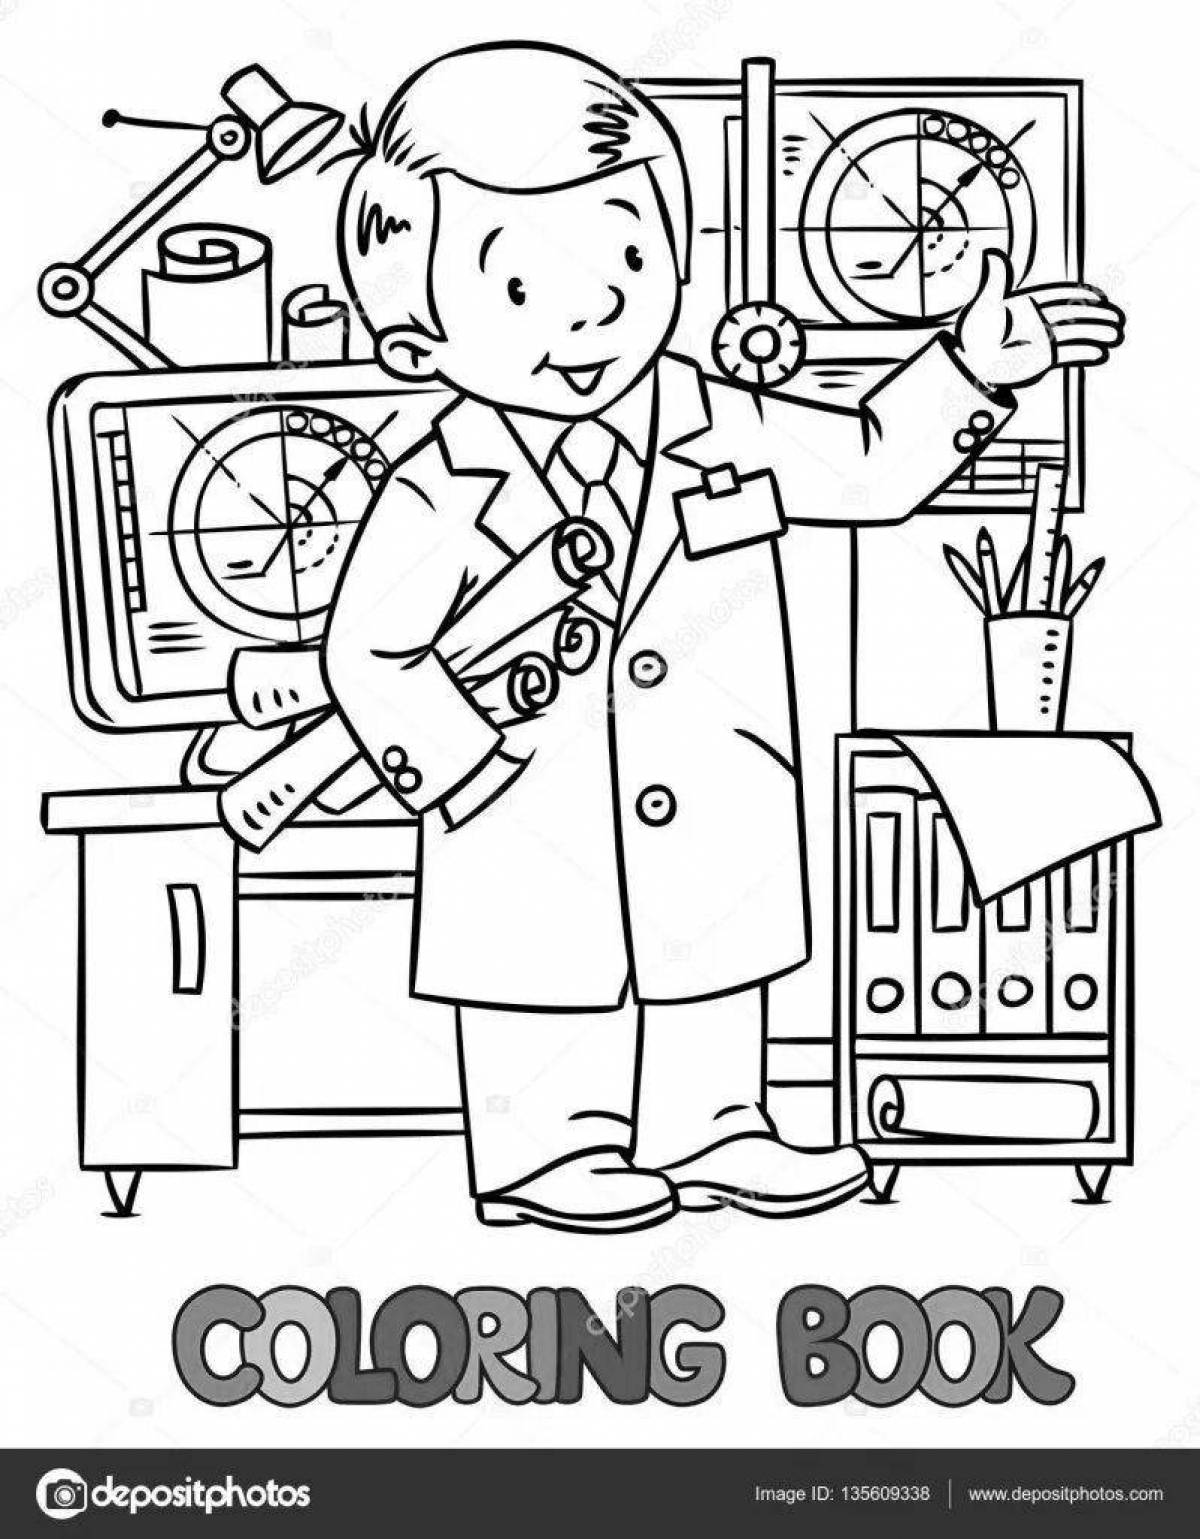 Outstanding Class 1 Profession Coloring Pages